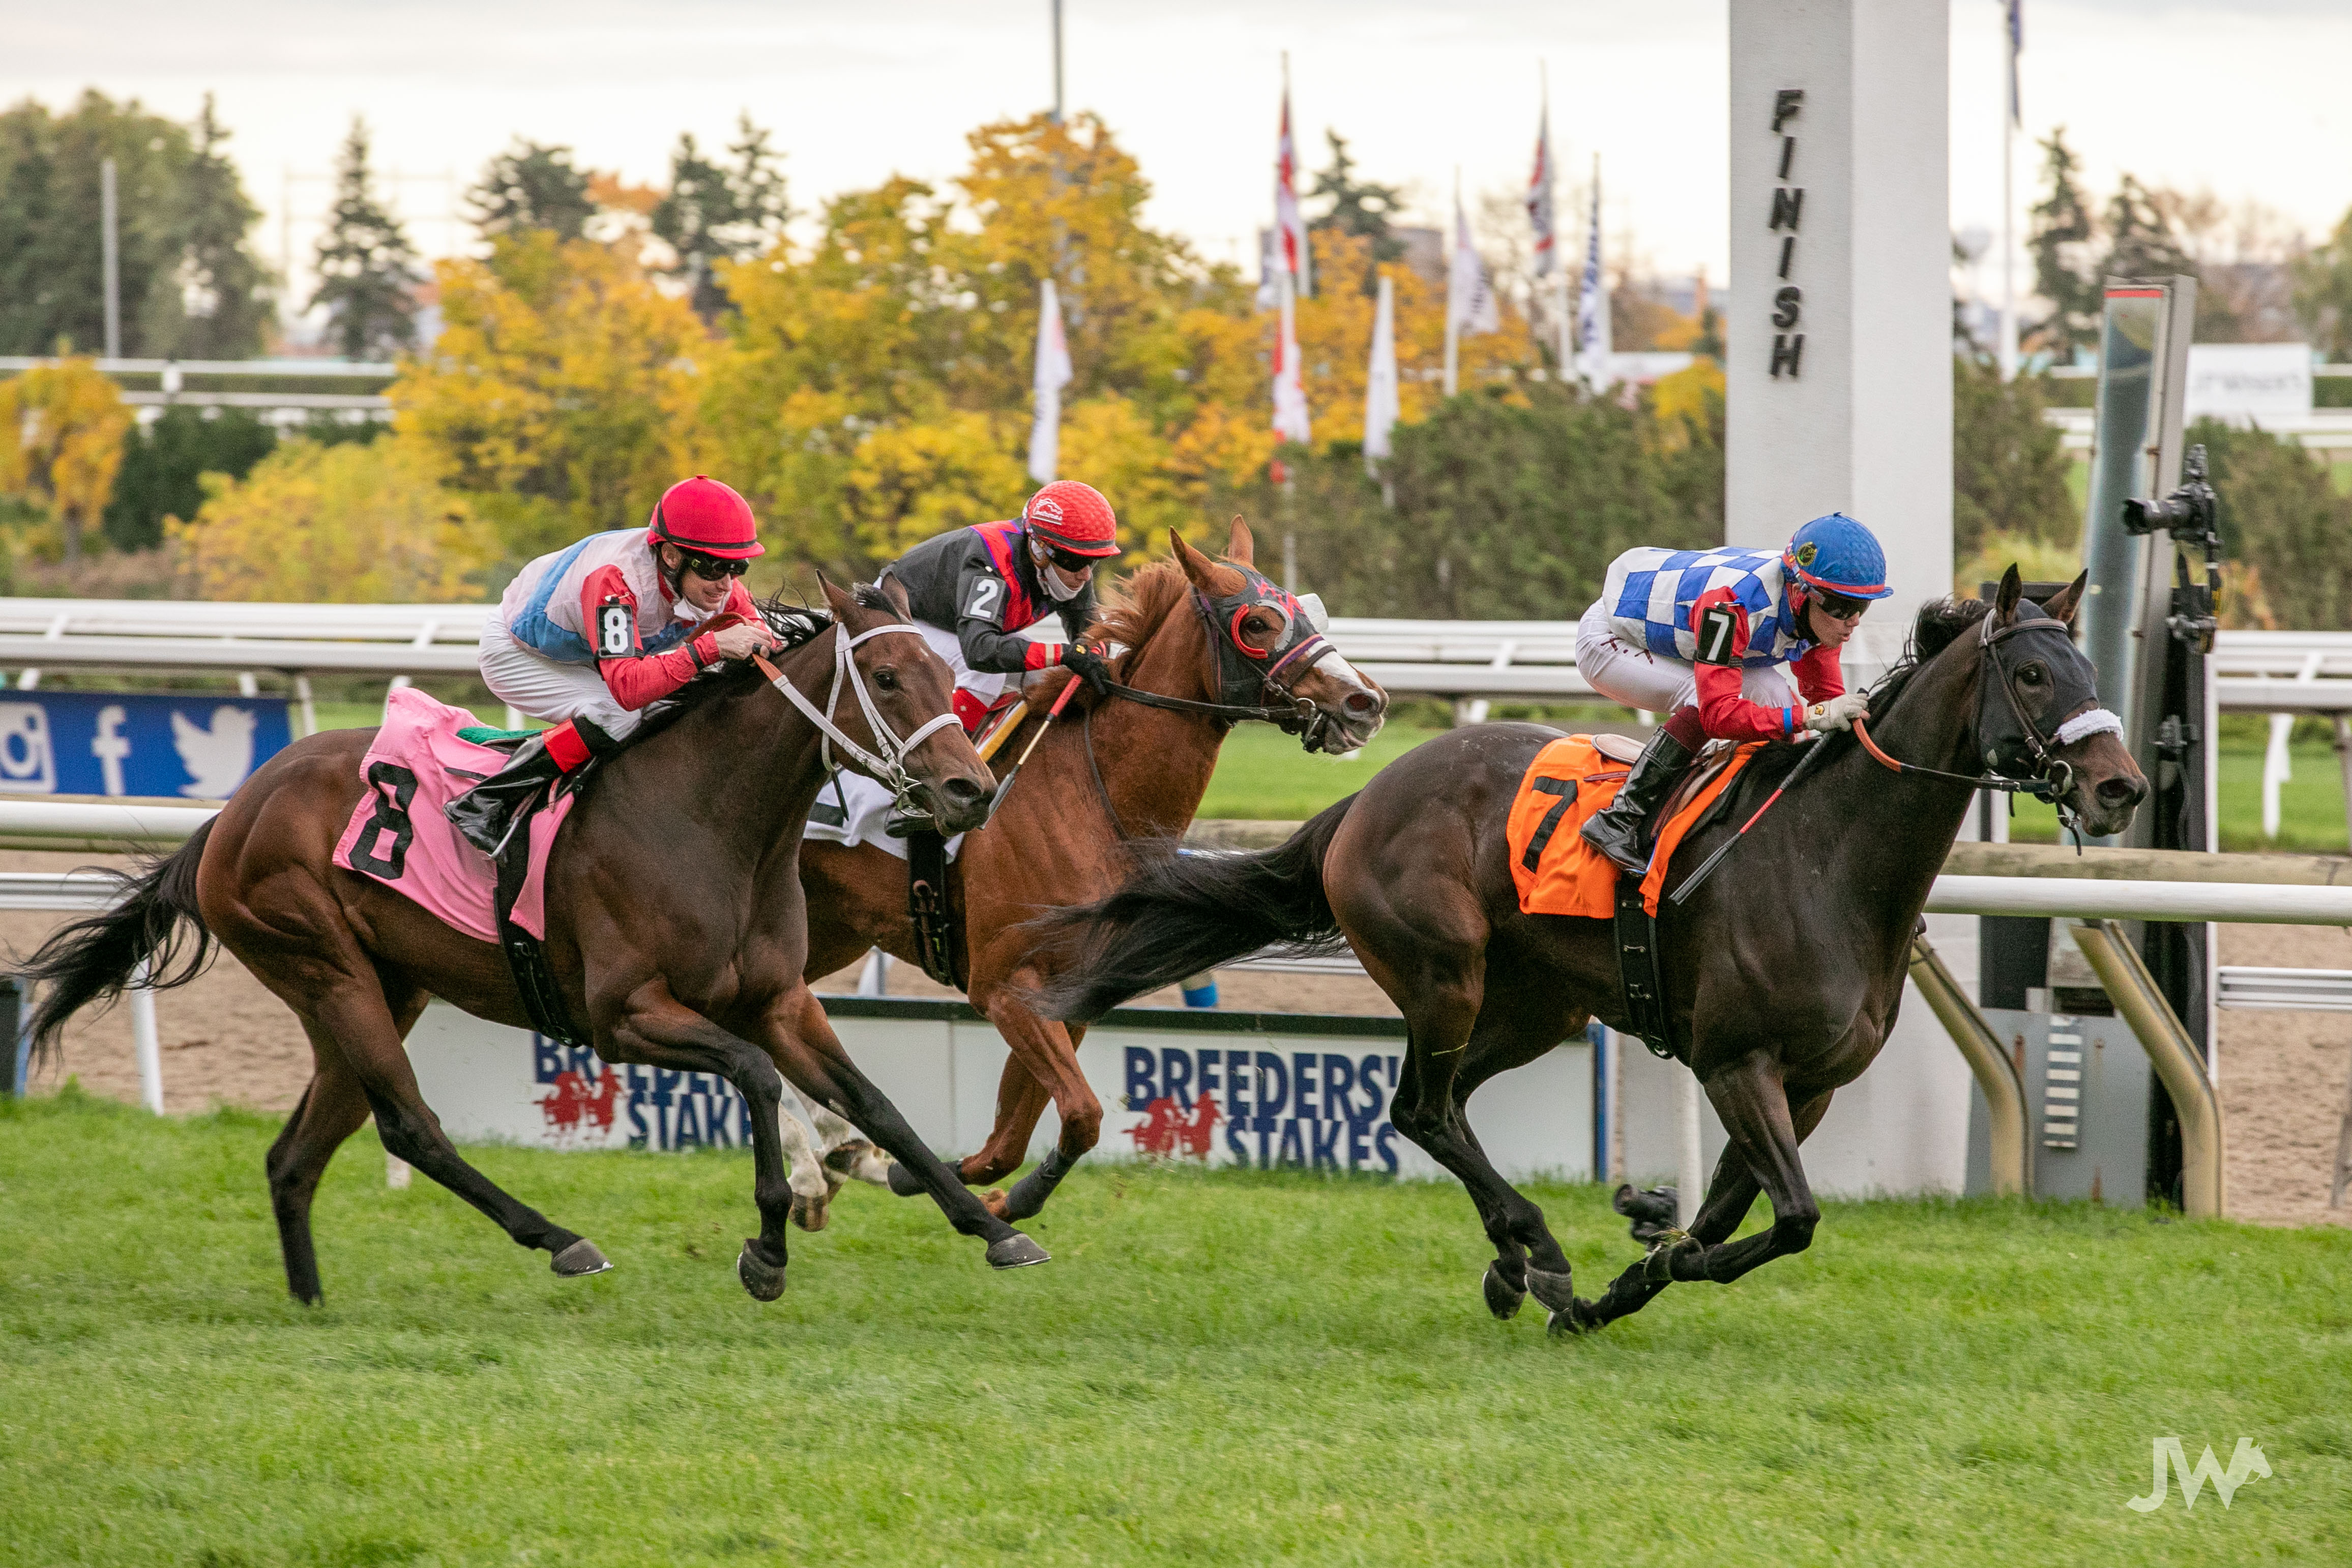 Woodbine Entertainment Announces Thoroughbred Season Is Officially Over